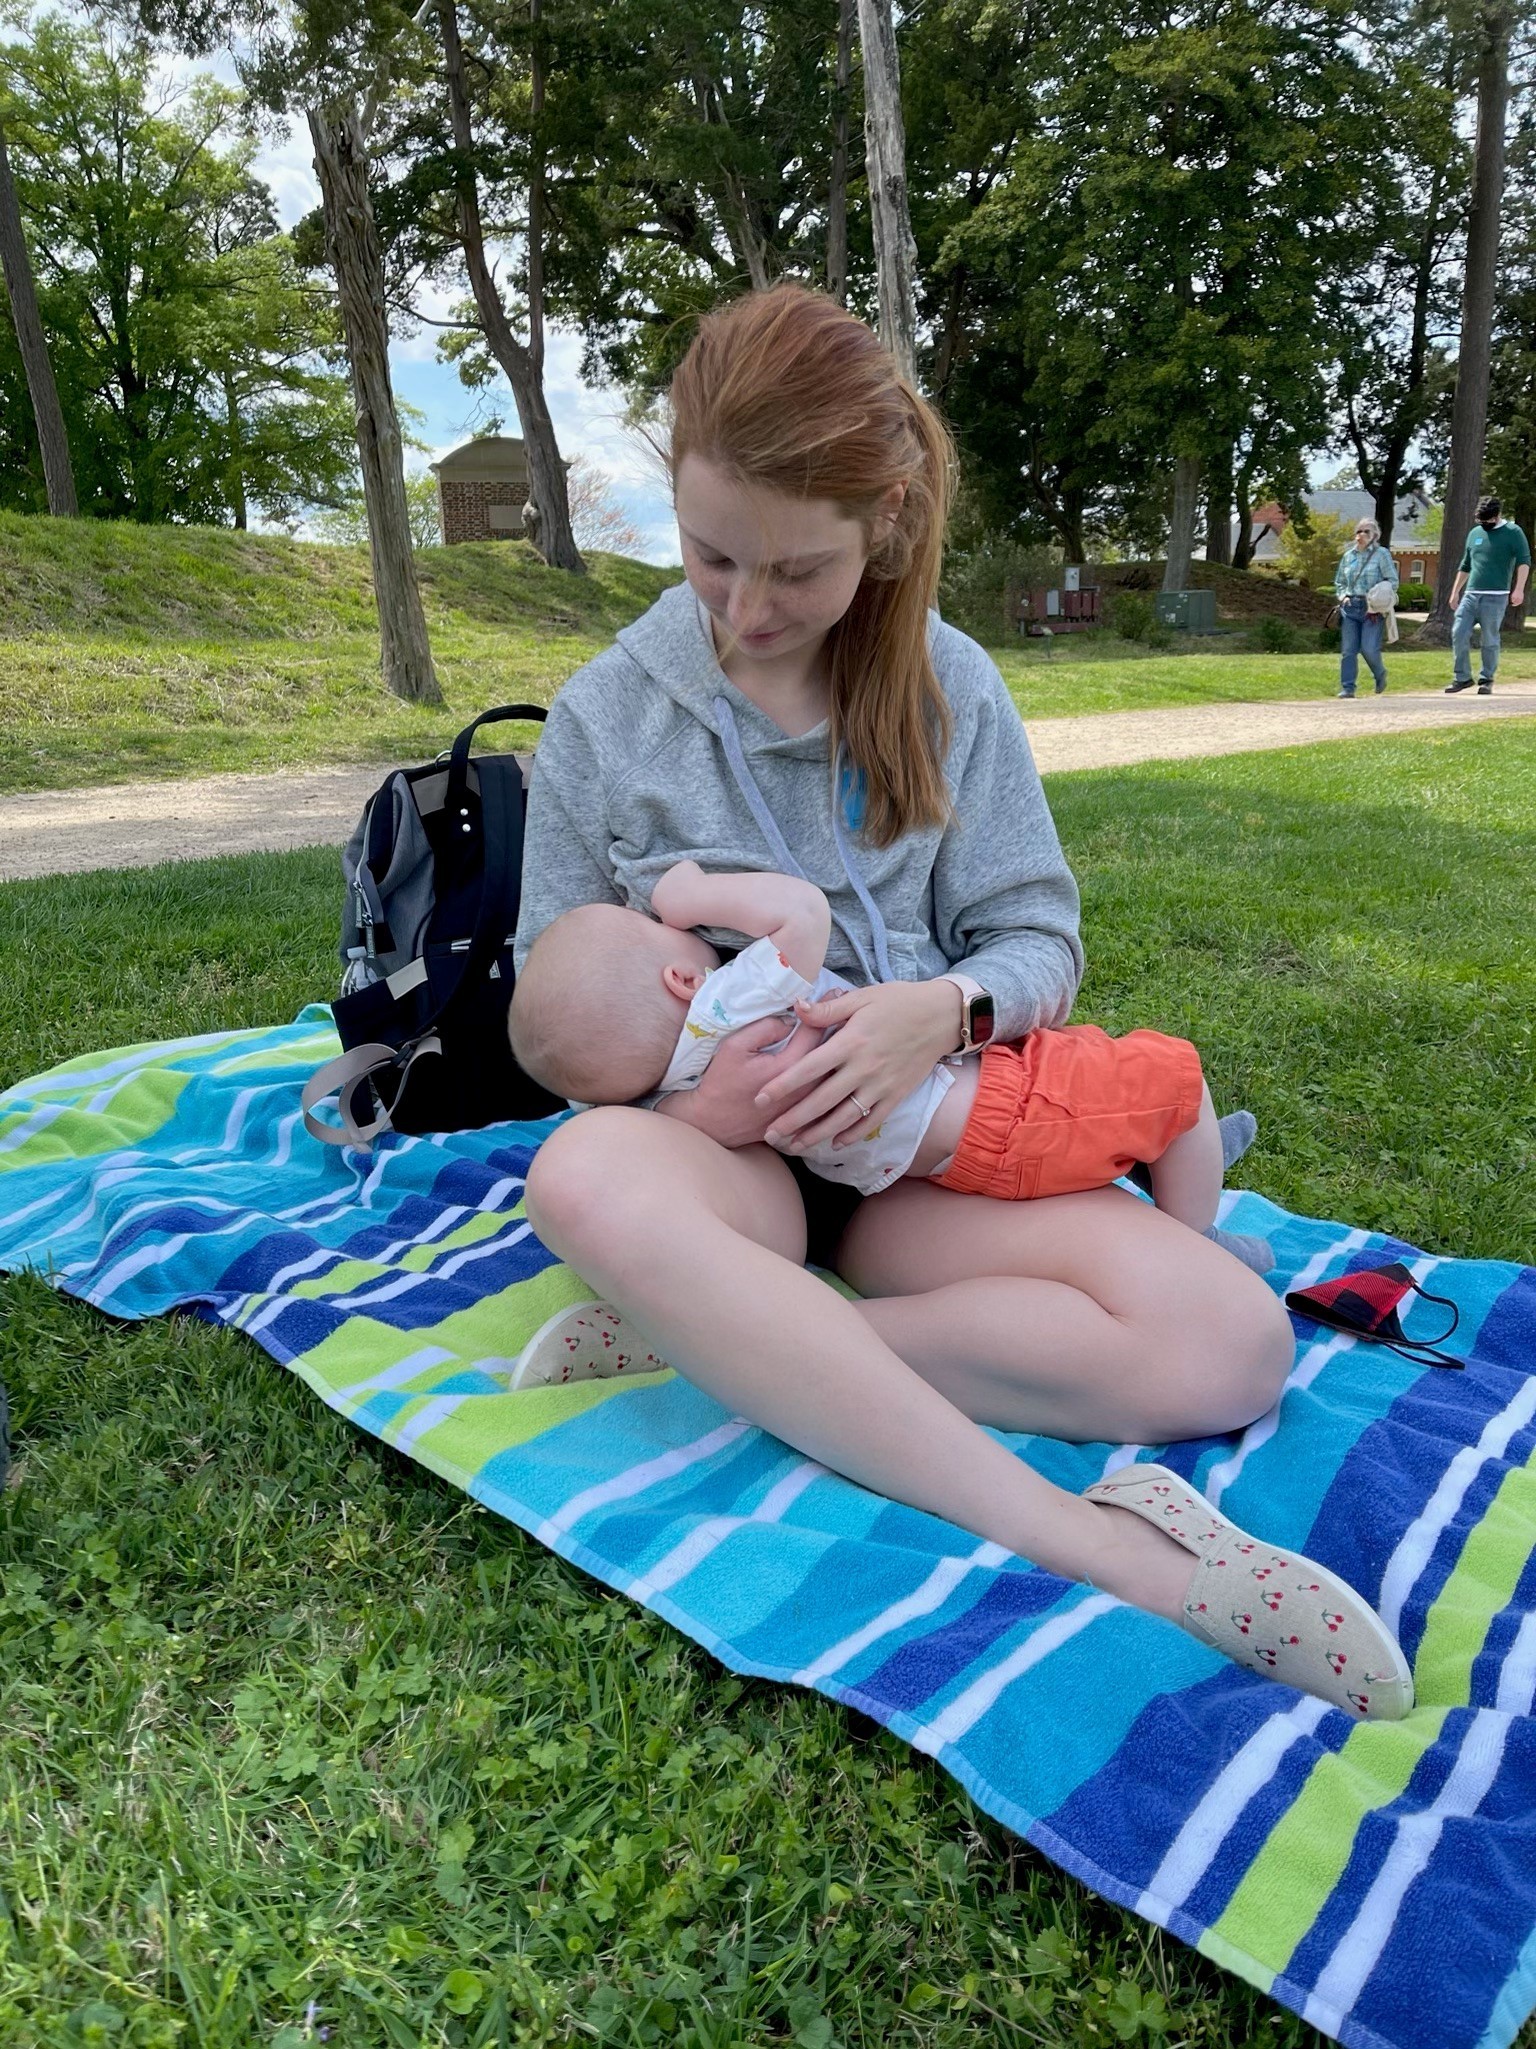 Supporting Army workplace breastfeeding needs to be an organizational priority - Article - The United States Army